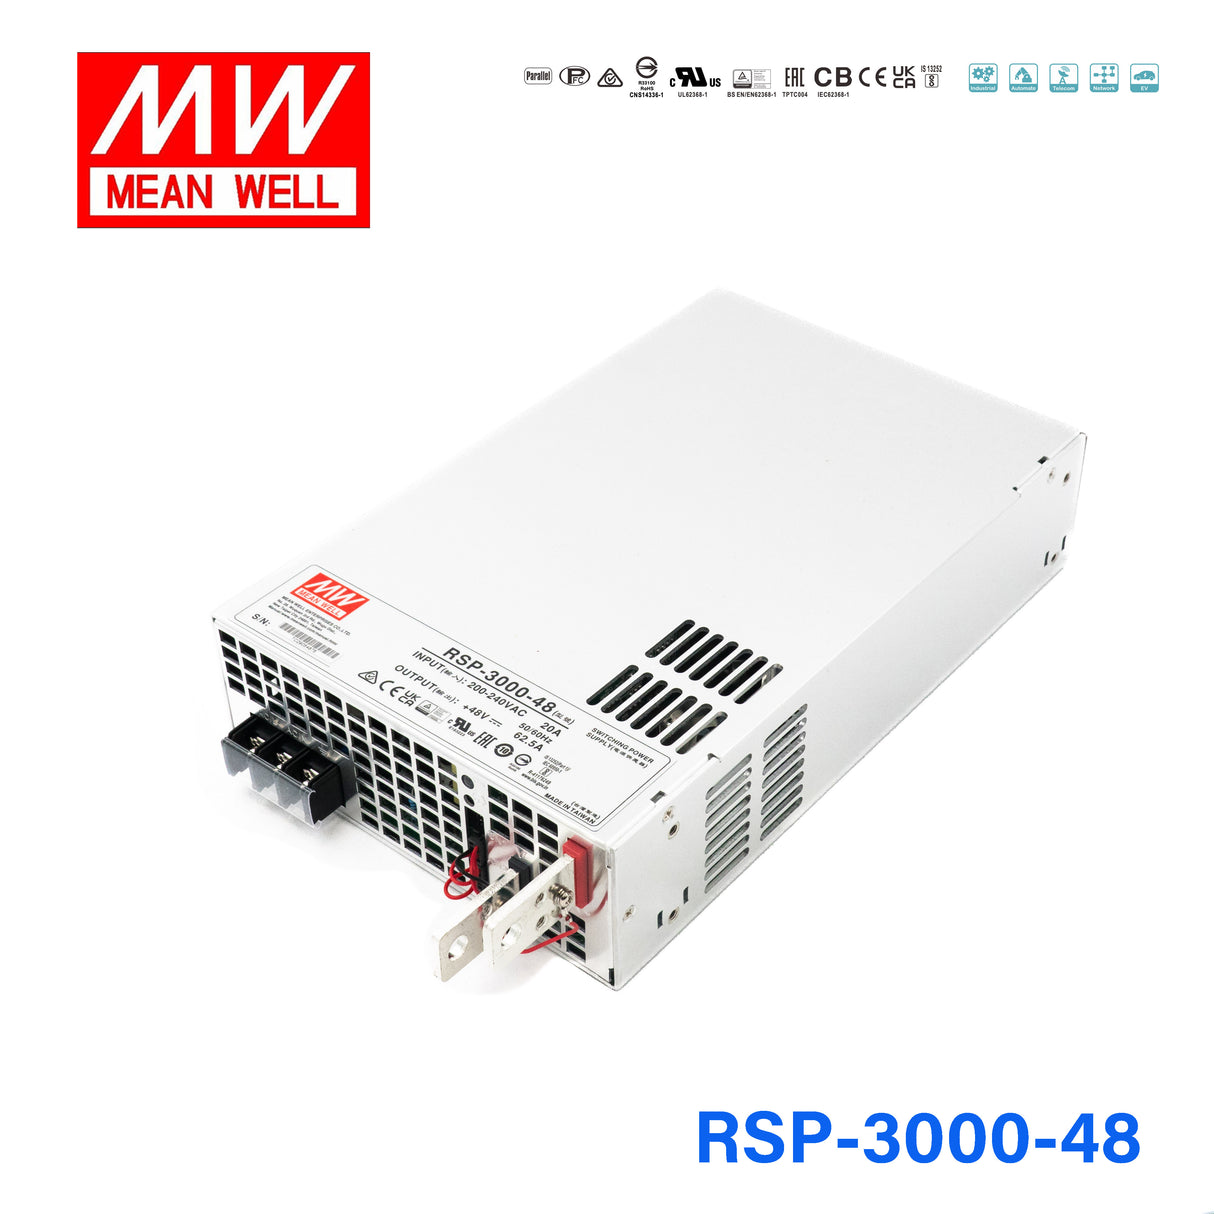 Mean Well RSP-3000-48 Power Supply 3000W 48V